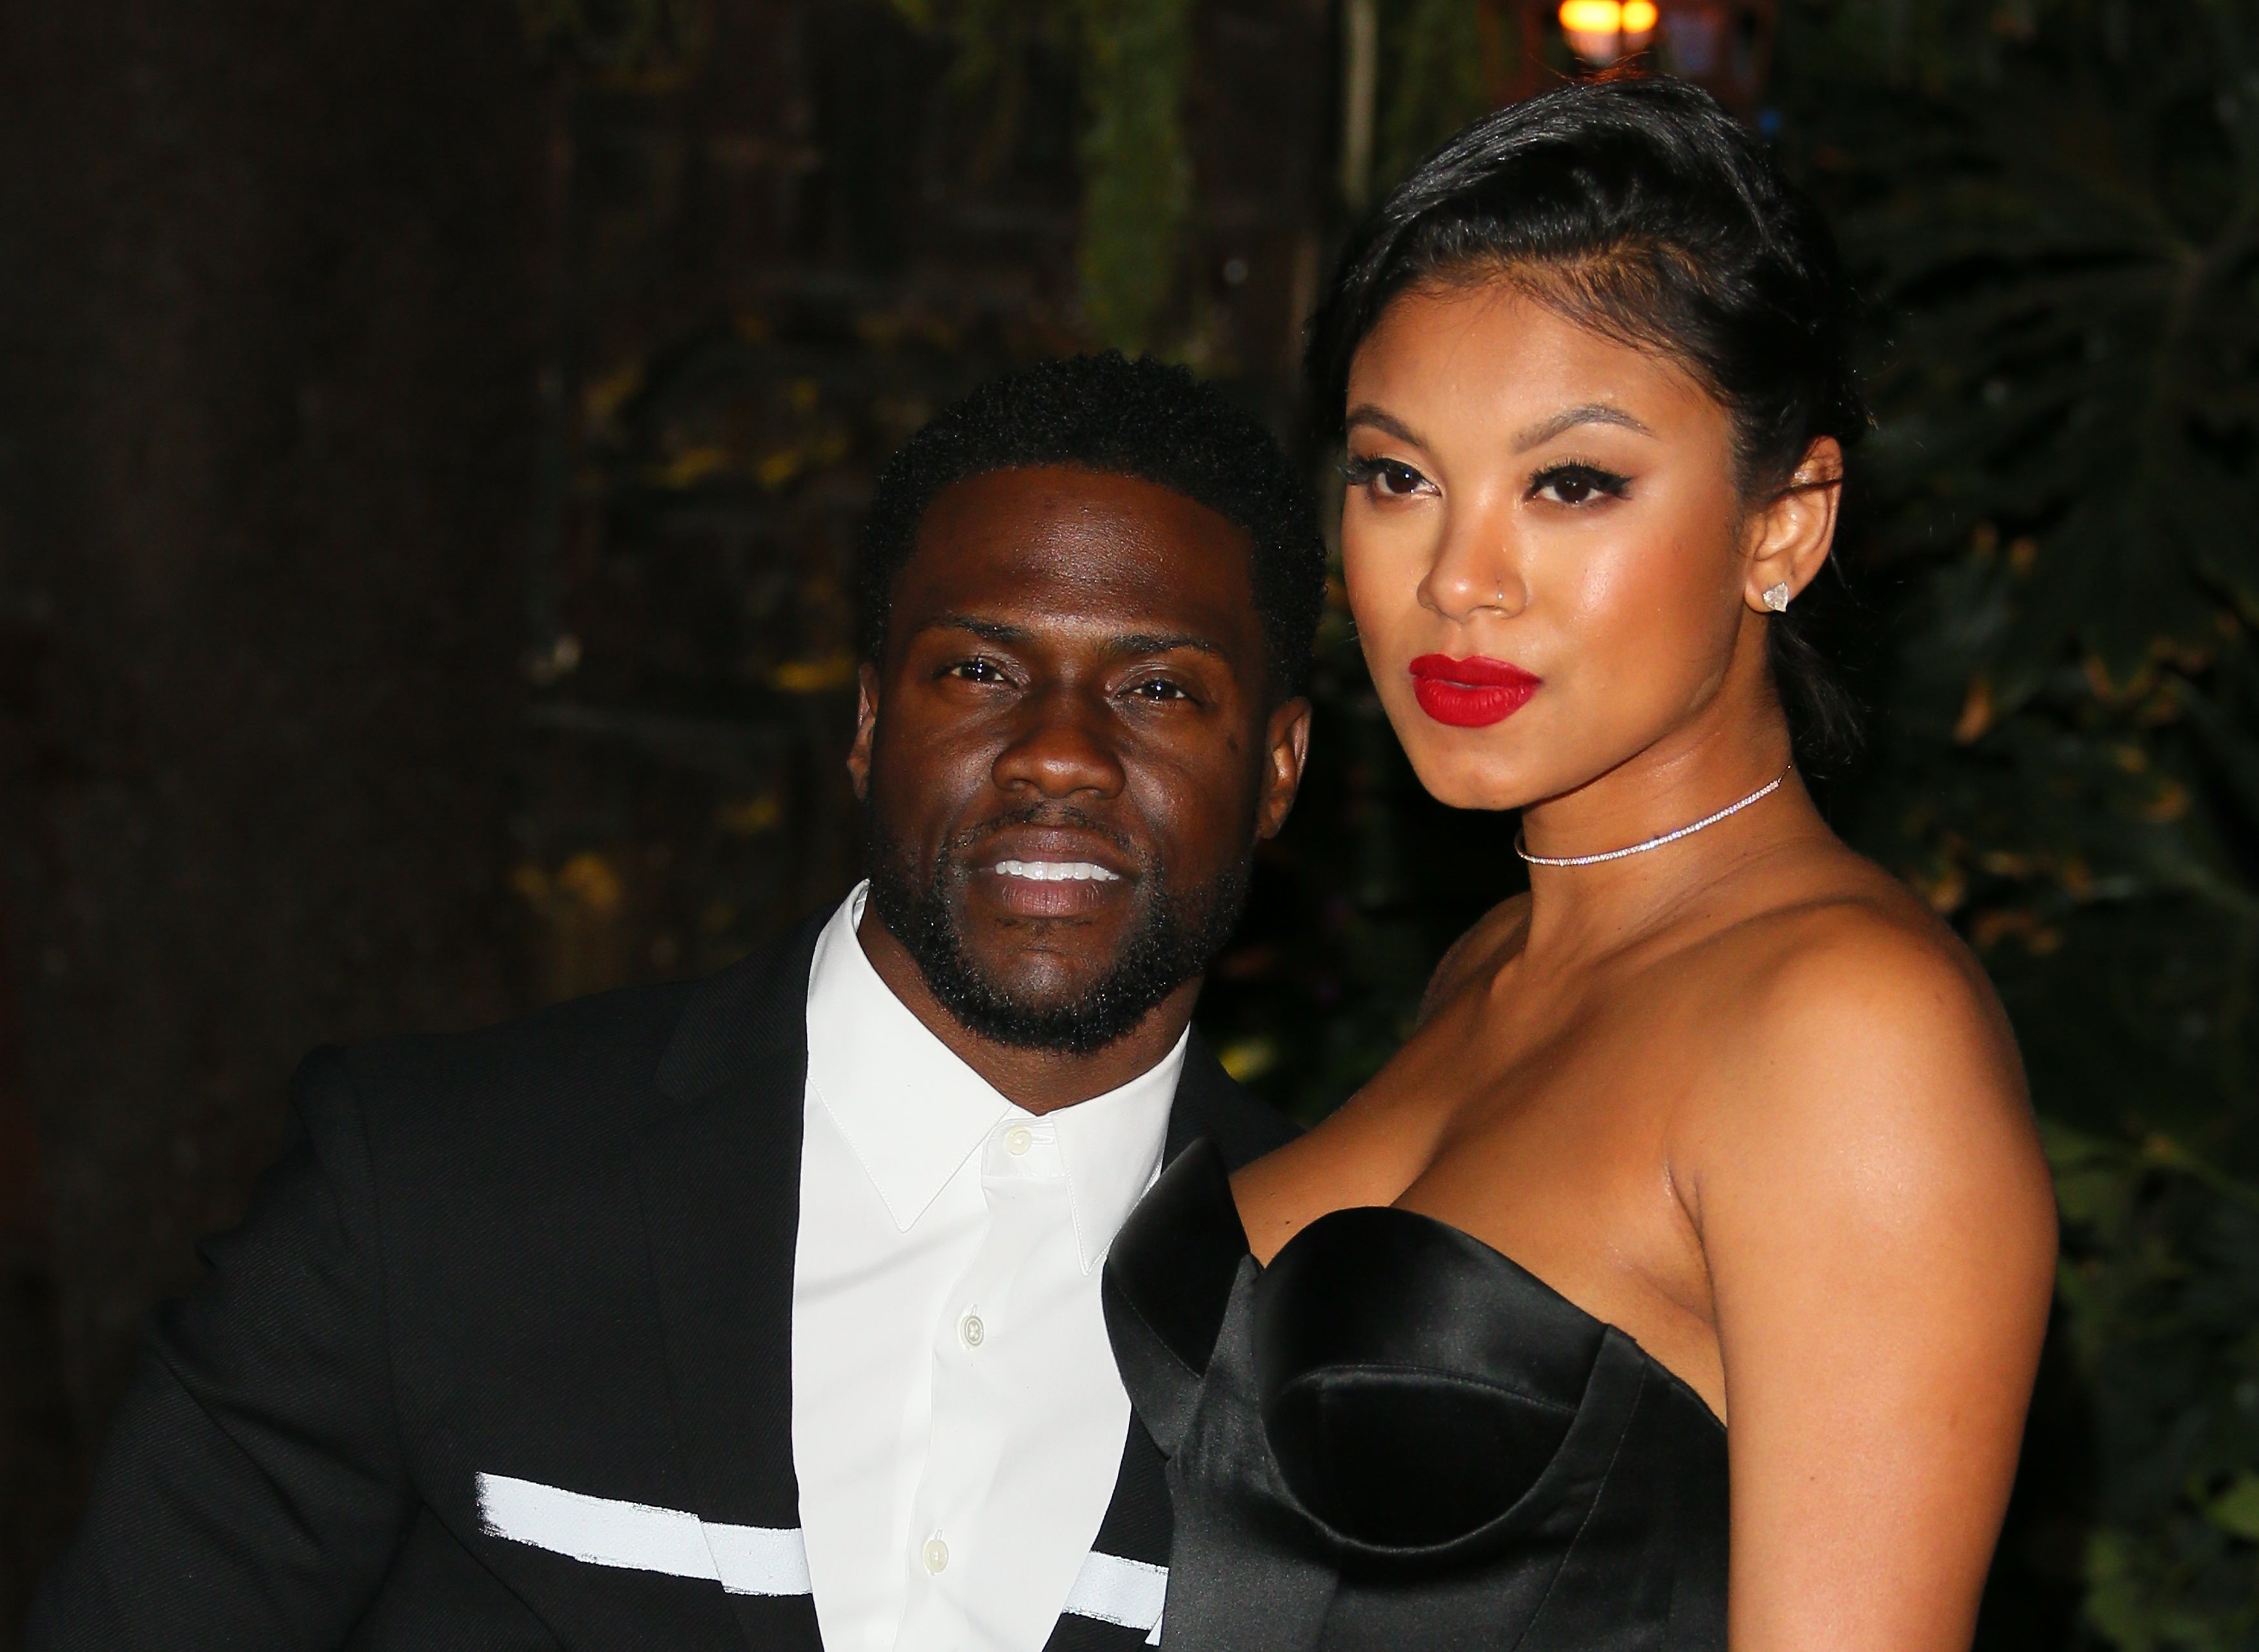 Kevin Harts Wife Eniko Found About His